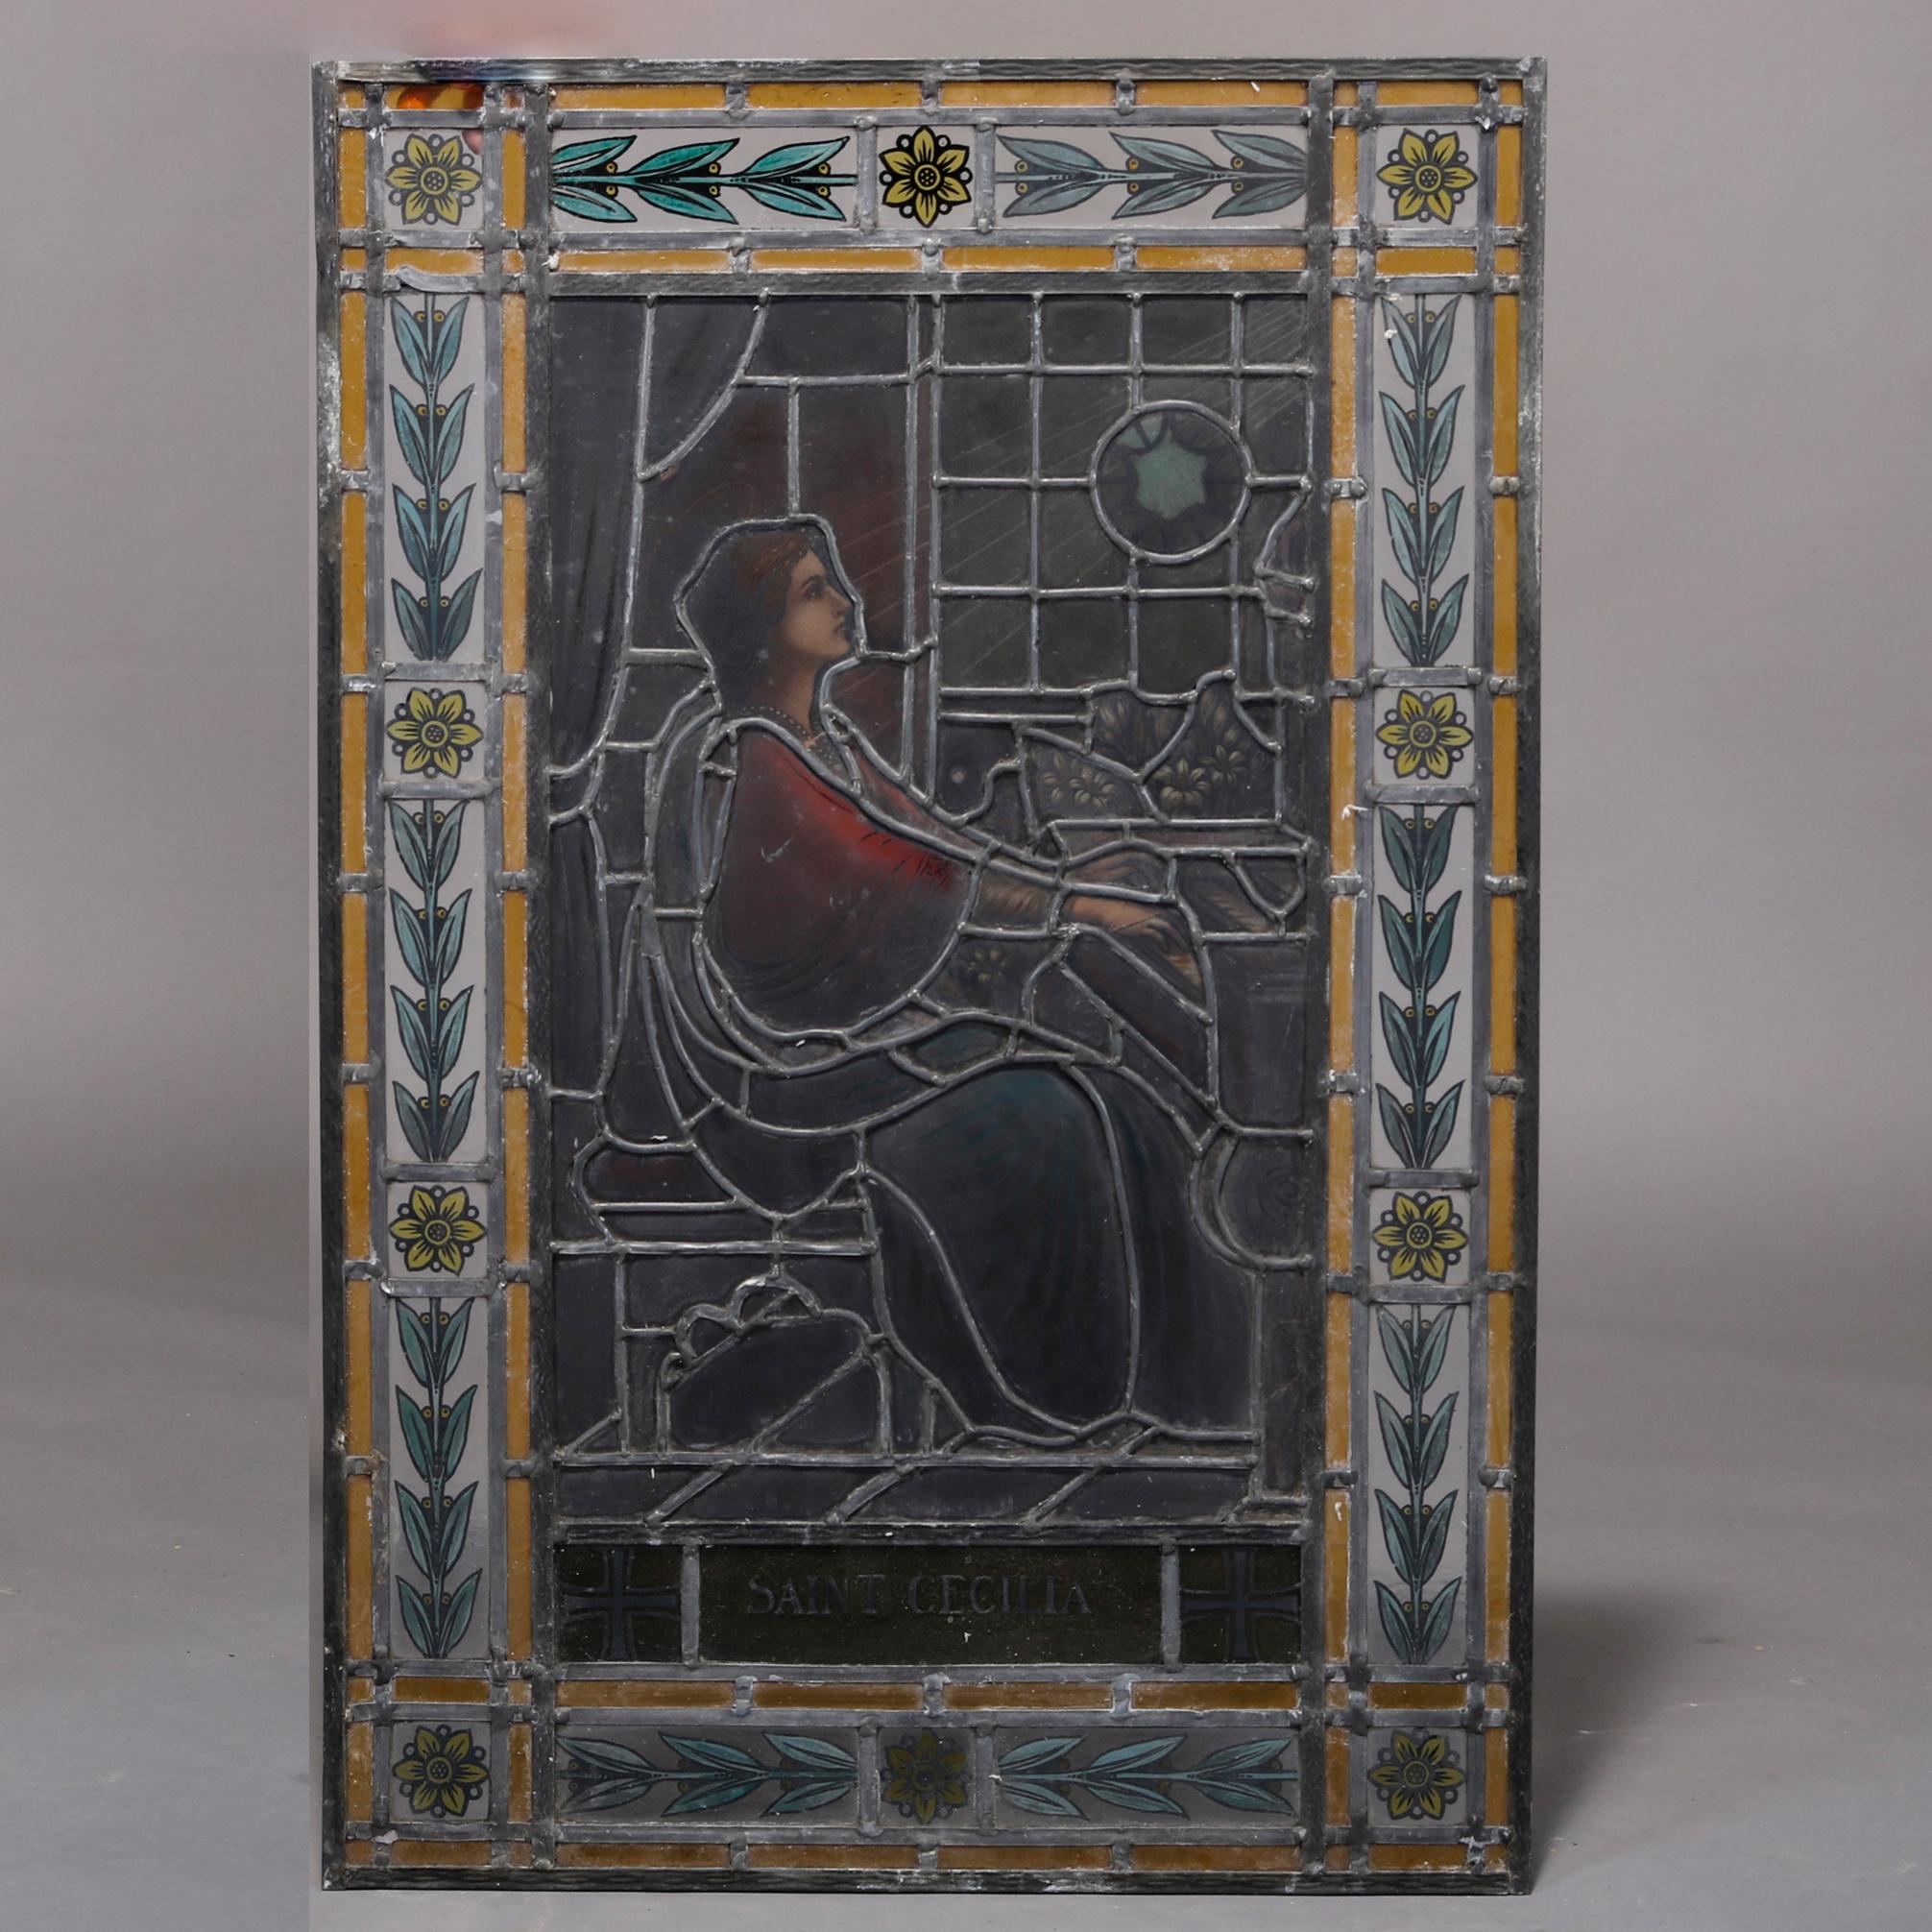 An antique leaded and hand painted stained glass window depicts Saint Cecilia seated at her piano, title panel and foliate decorated frame as photographed, architectural element, 19th century

Measures: 39